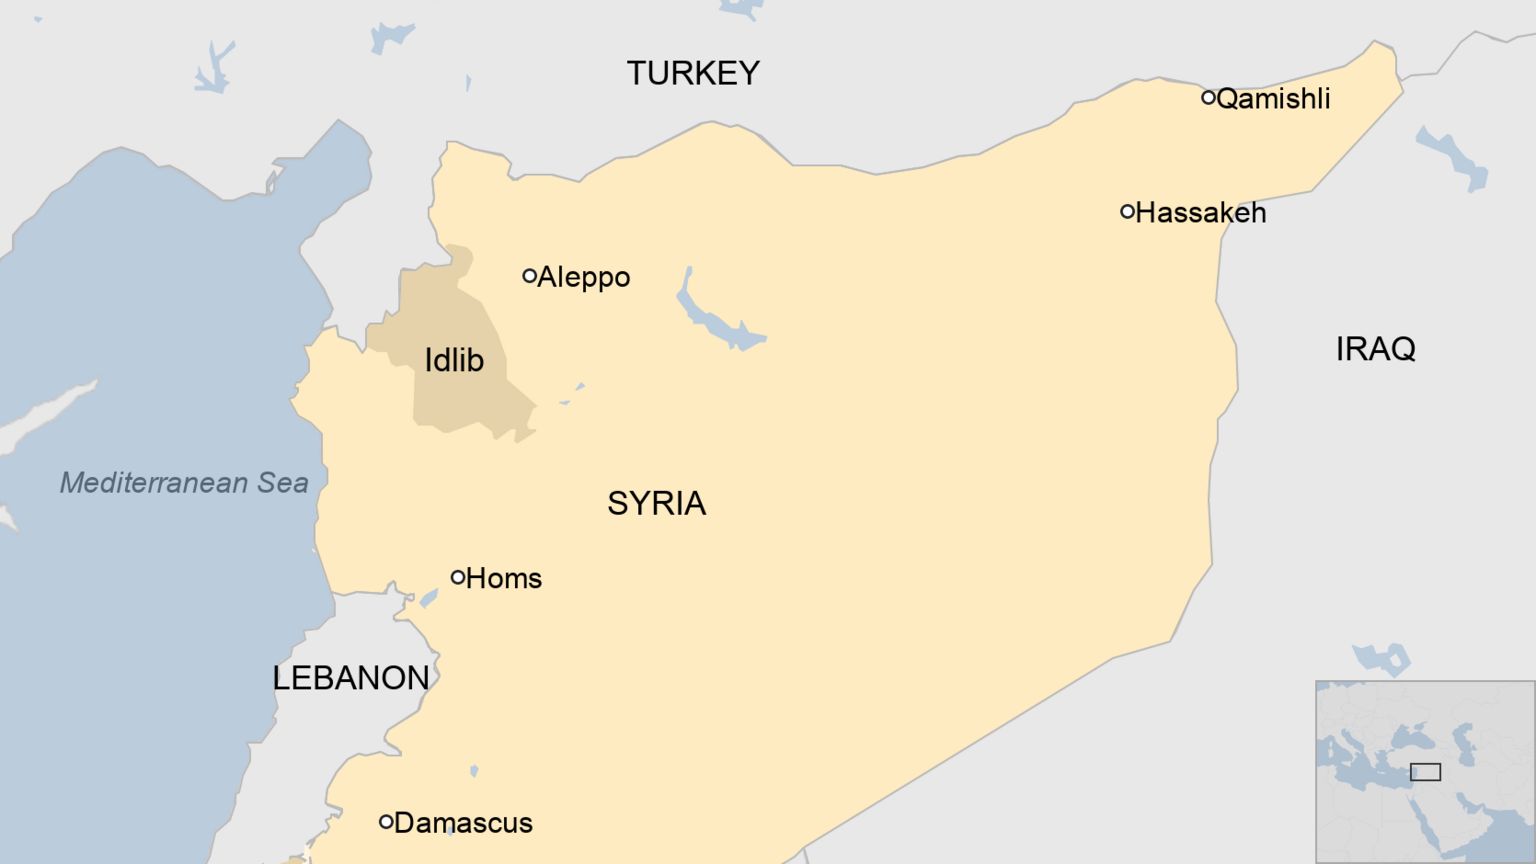 Map of Syria showing Homs and Idlib